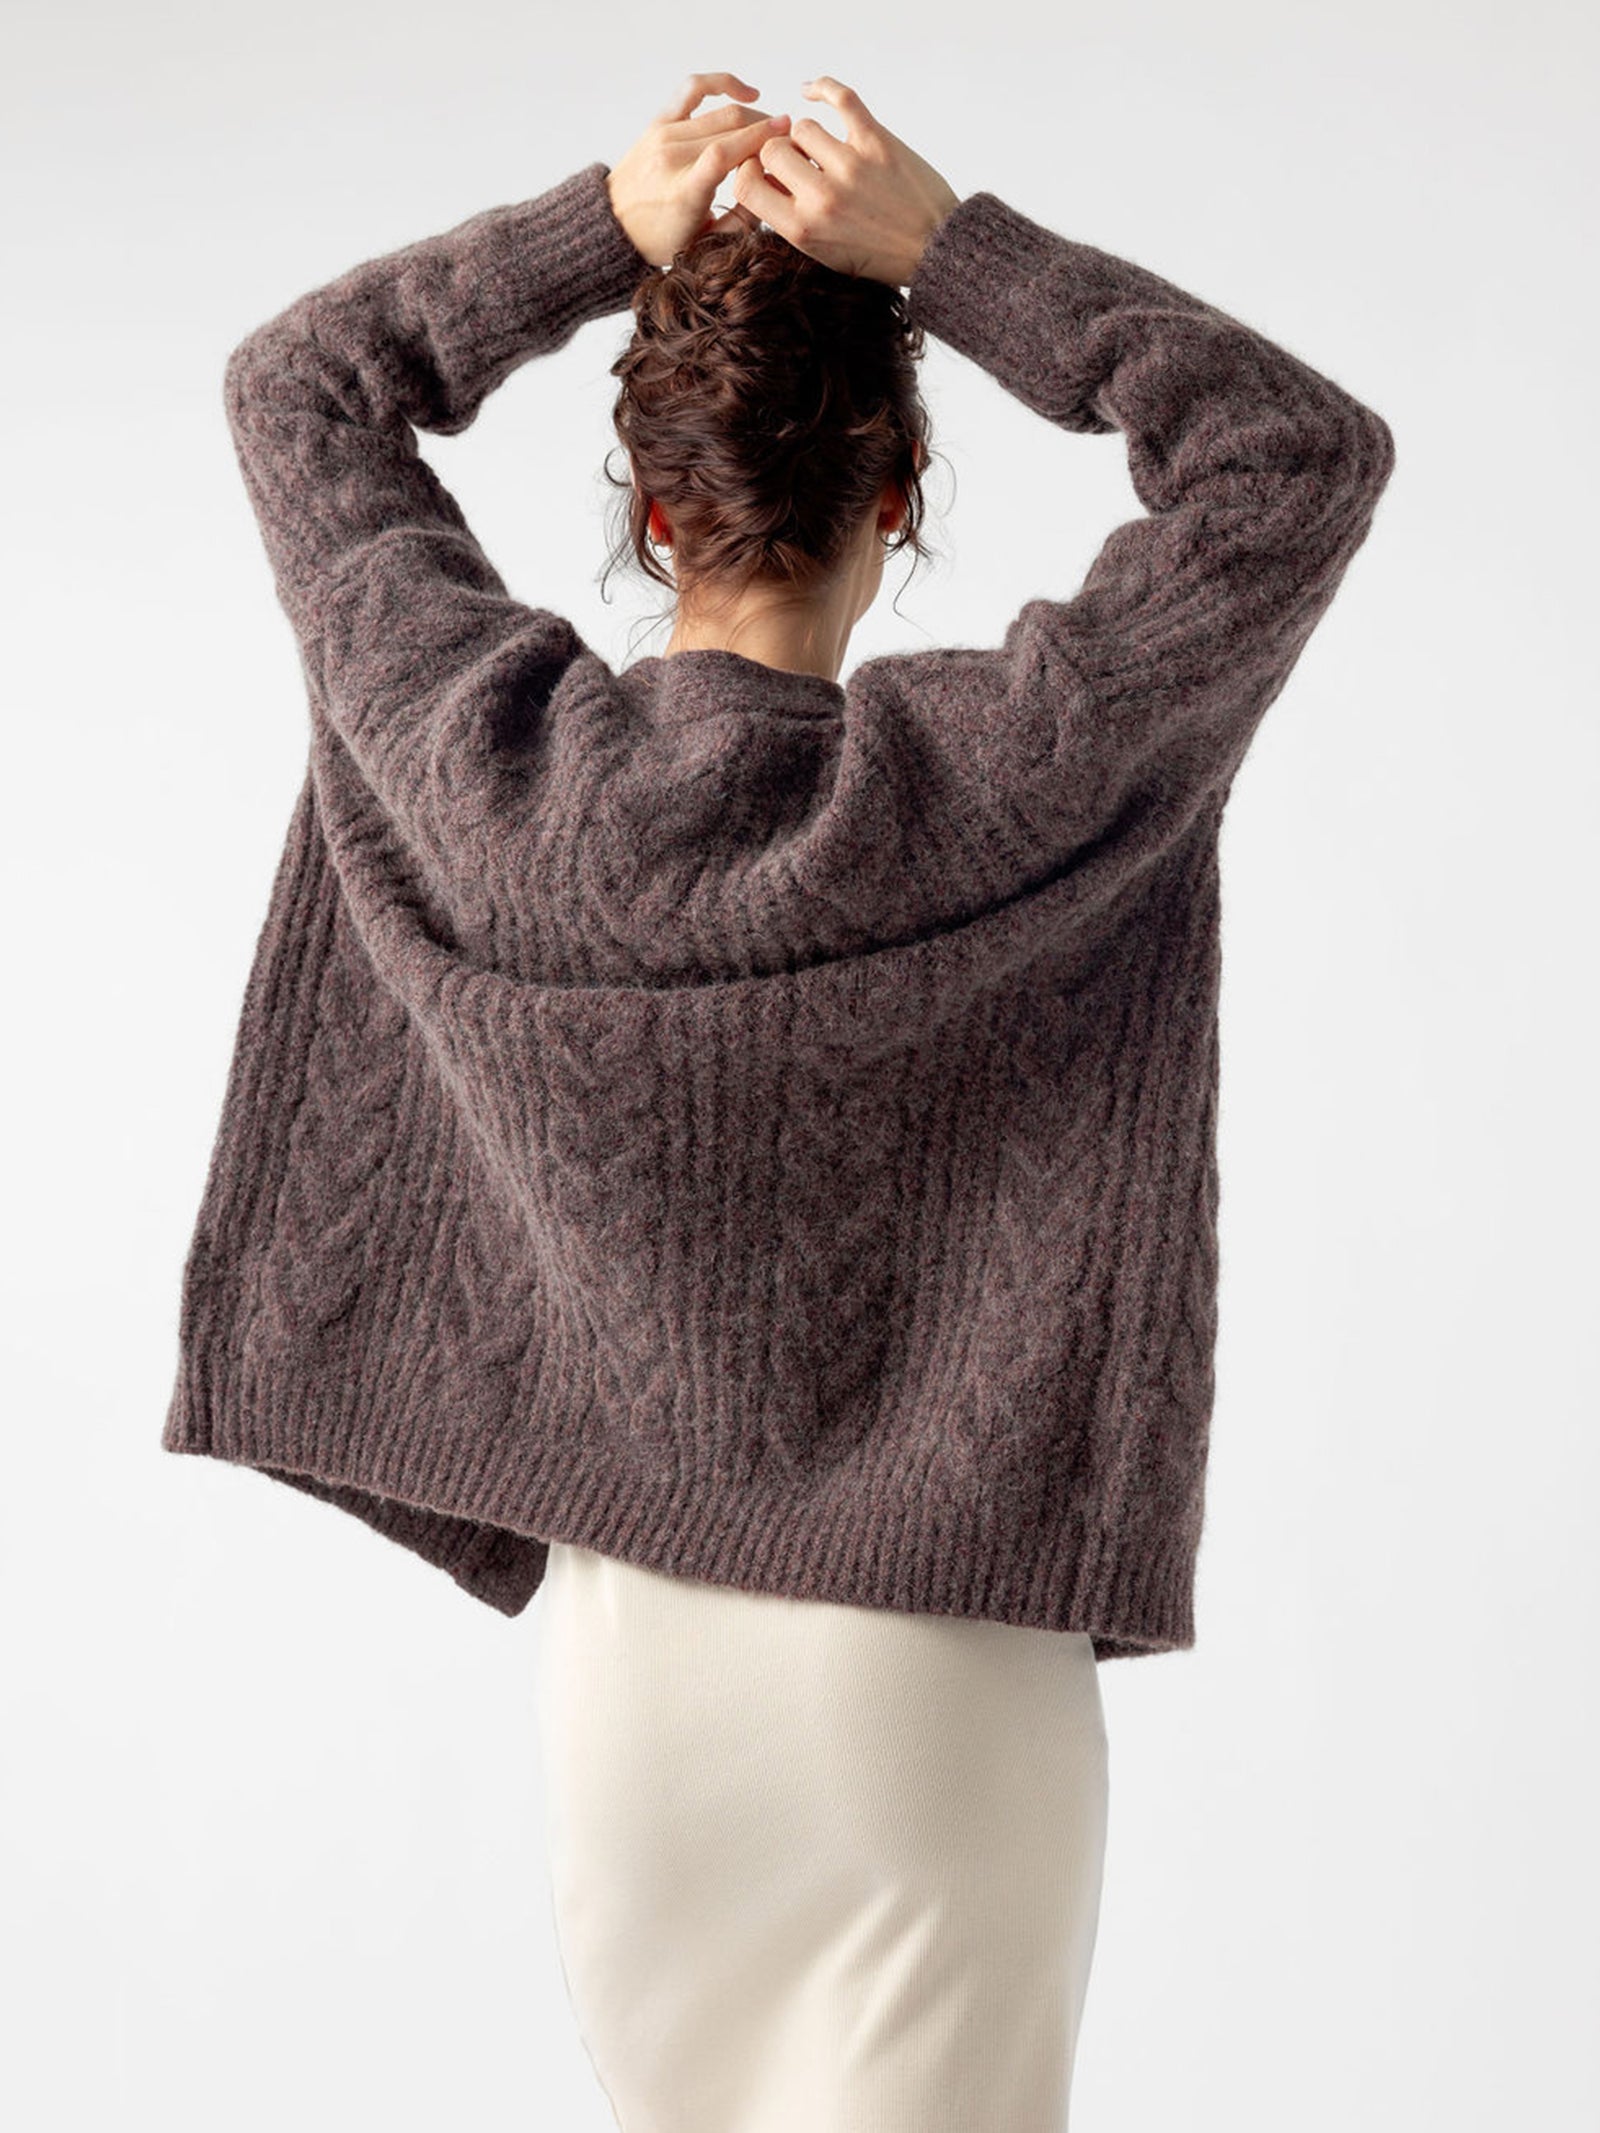 Back of woman wearing bordeaux cardigan with her arms up 